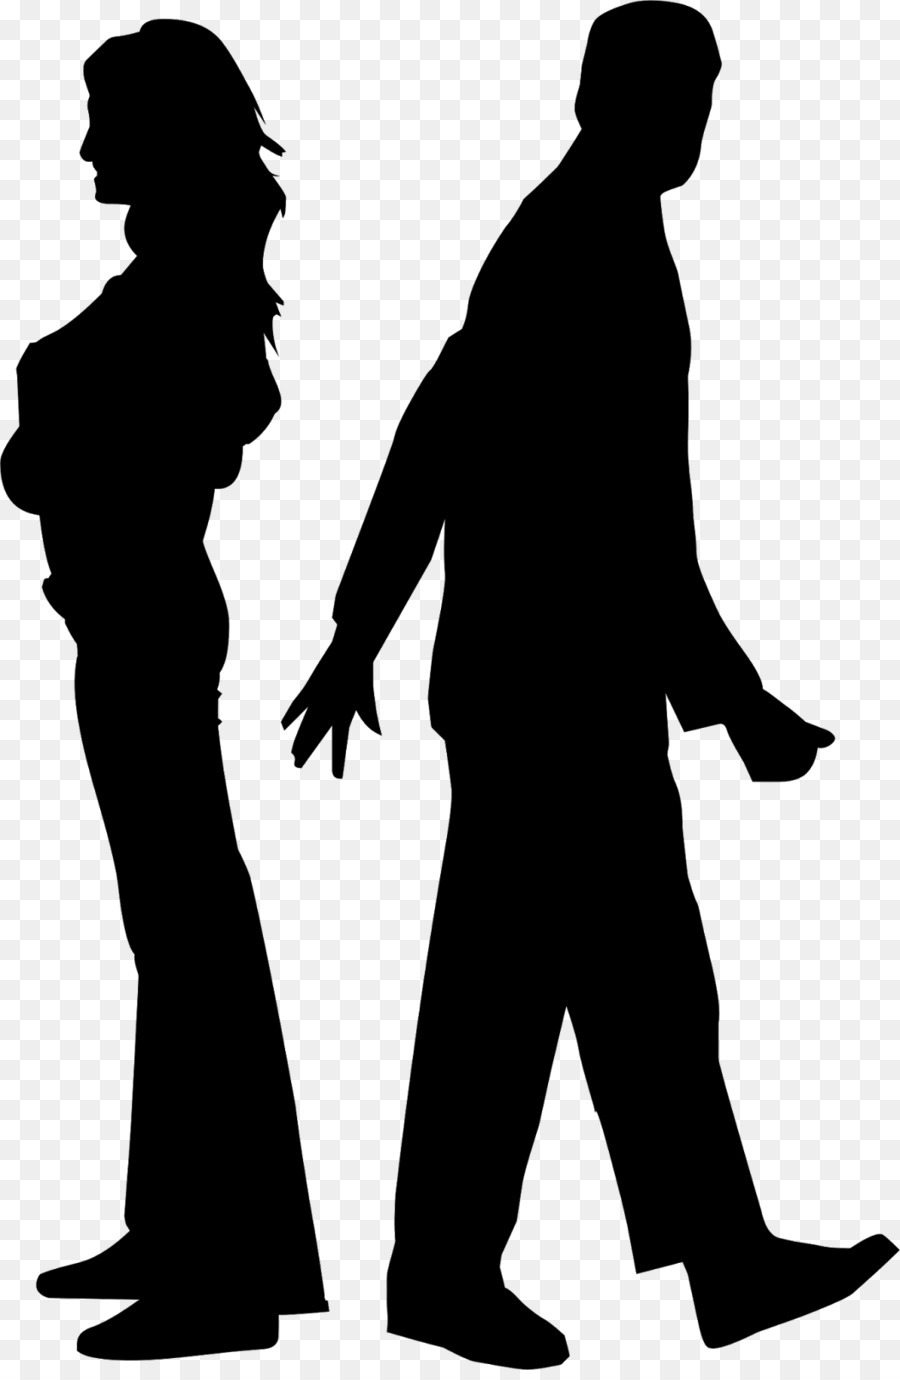 couple Intimate relationship Relationship counseling Clip art - couple silhouette png download - 1051*1600 - Free Transparent Couple png Download.